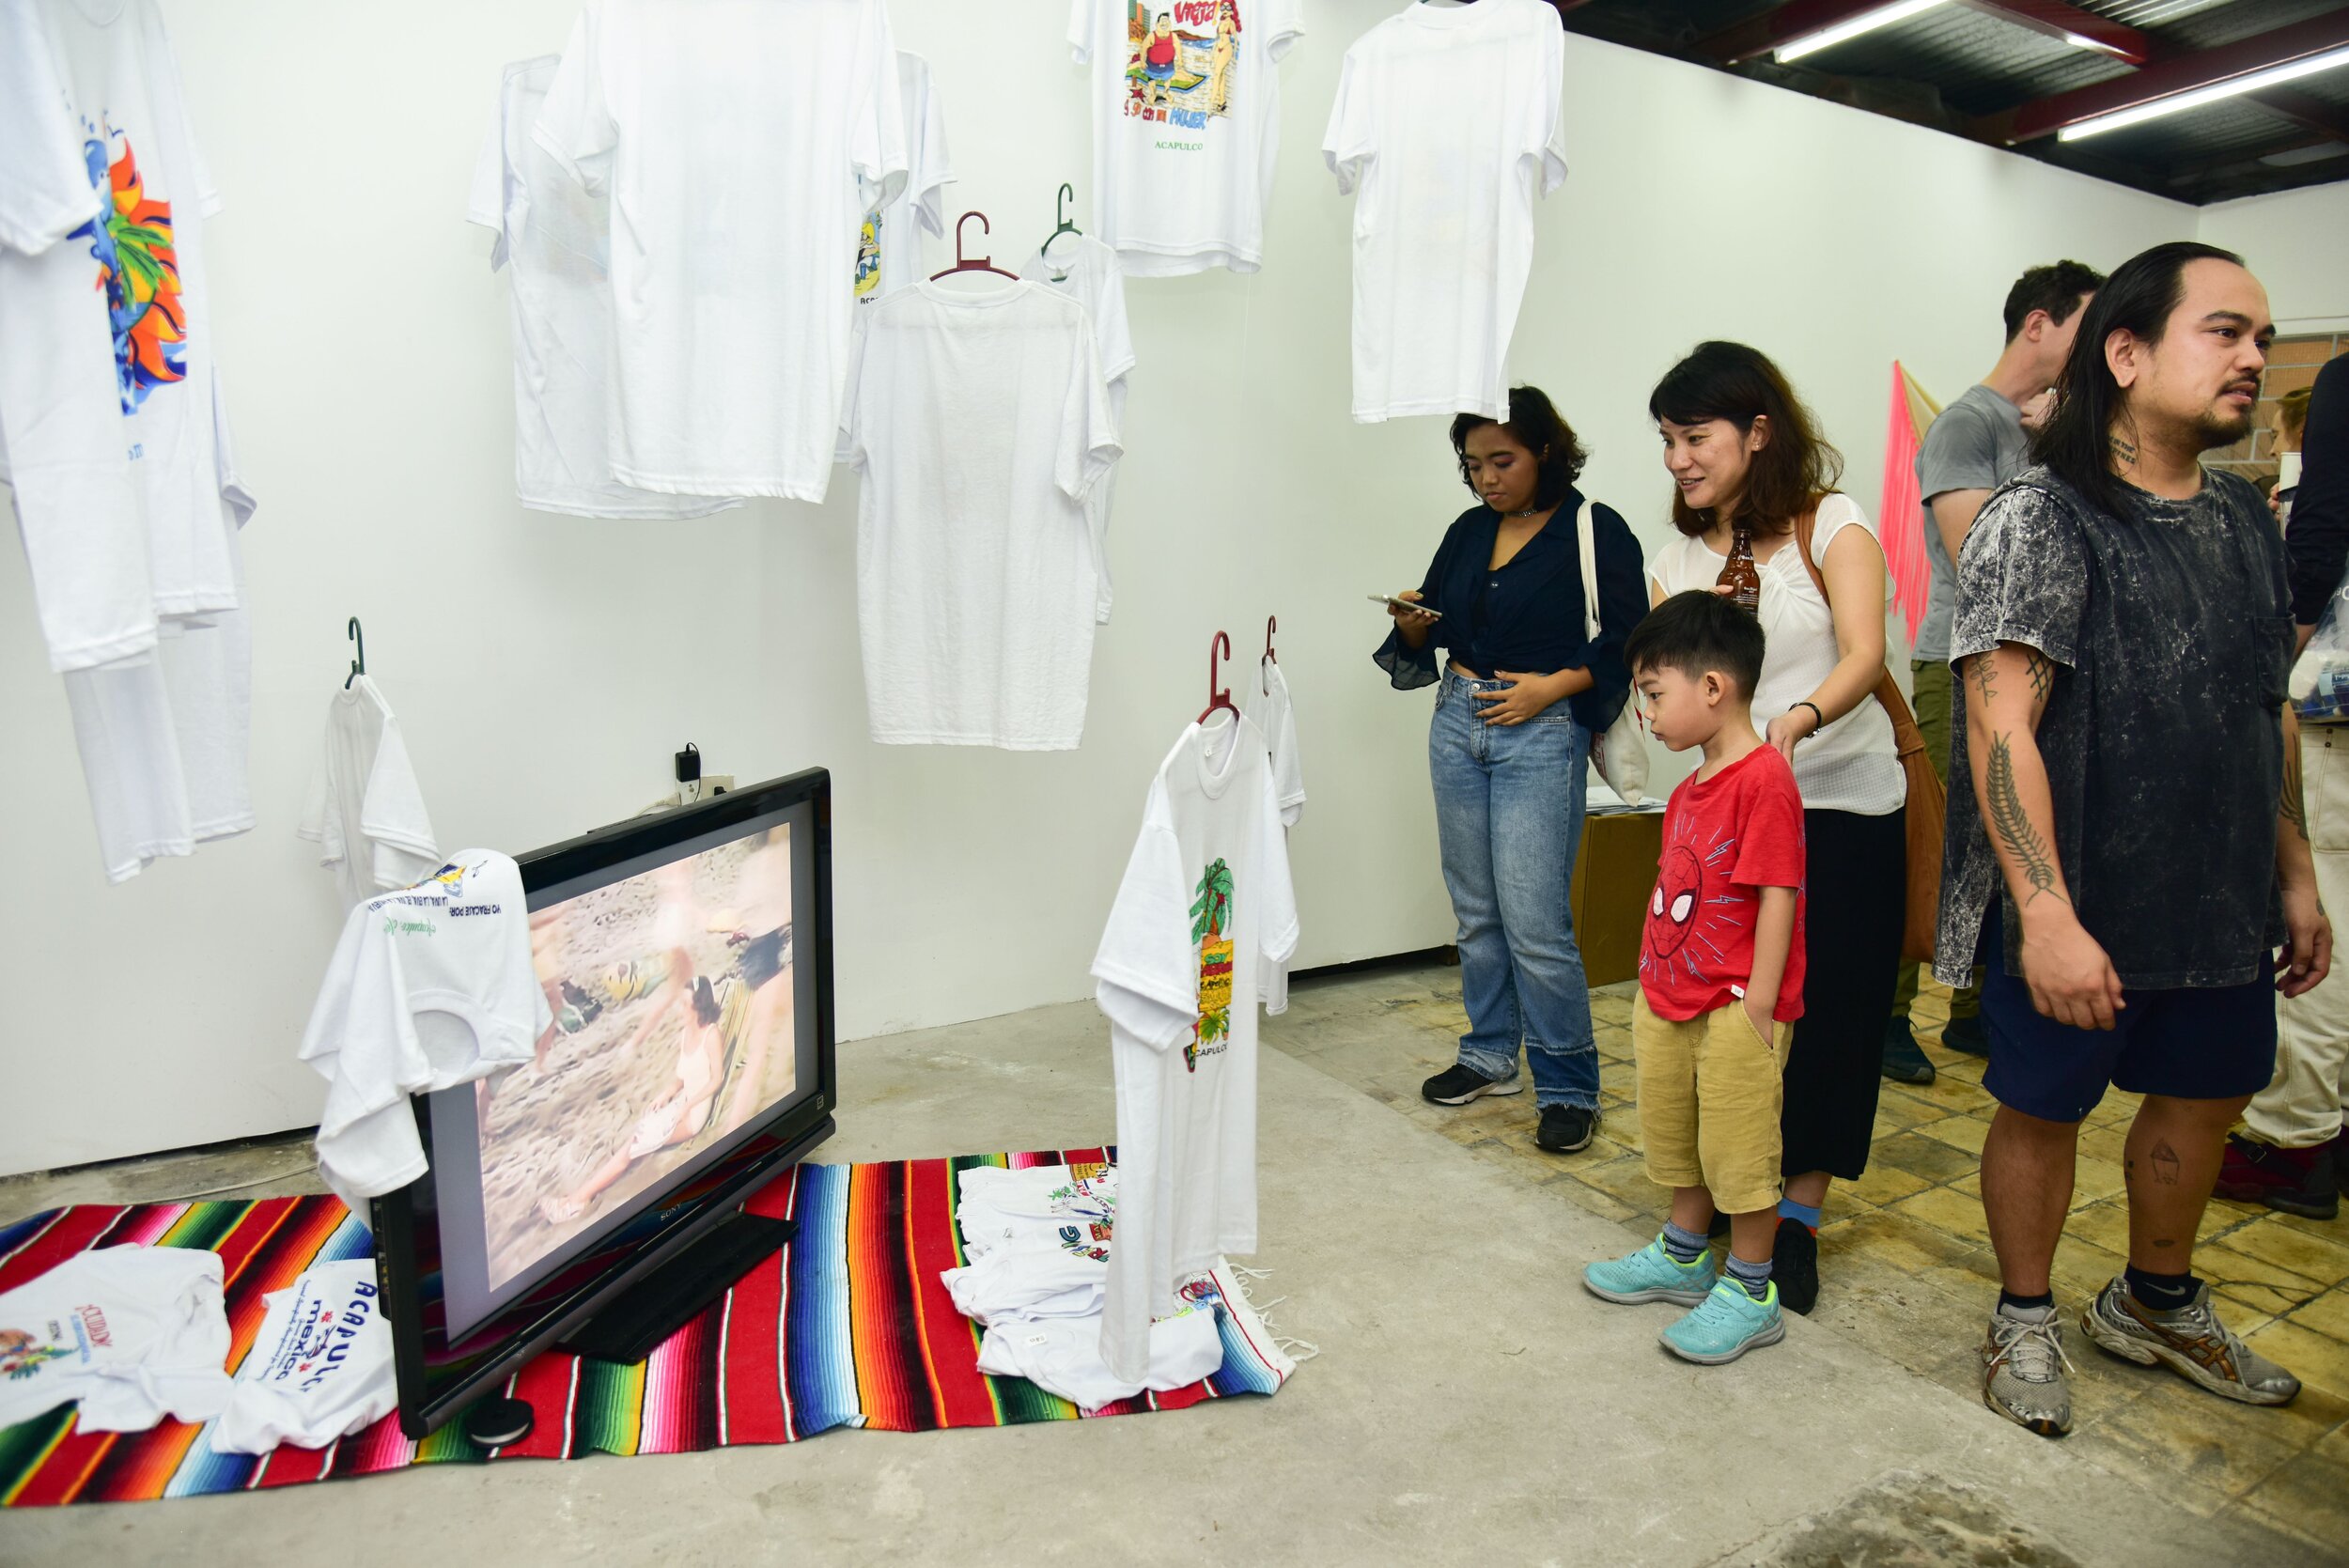 Cristóbal Gracia, "Nos Value Madres", 2019, mixed media, touristic t-shirts from Acapulco, sarape blanket; "Tres Amigos, the good, the bad and the stuped" video loop (3:35 mins) 